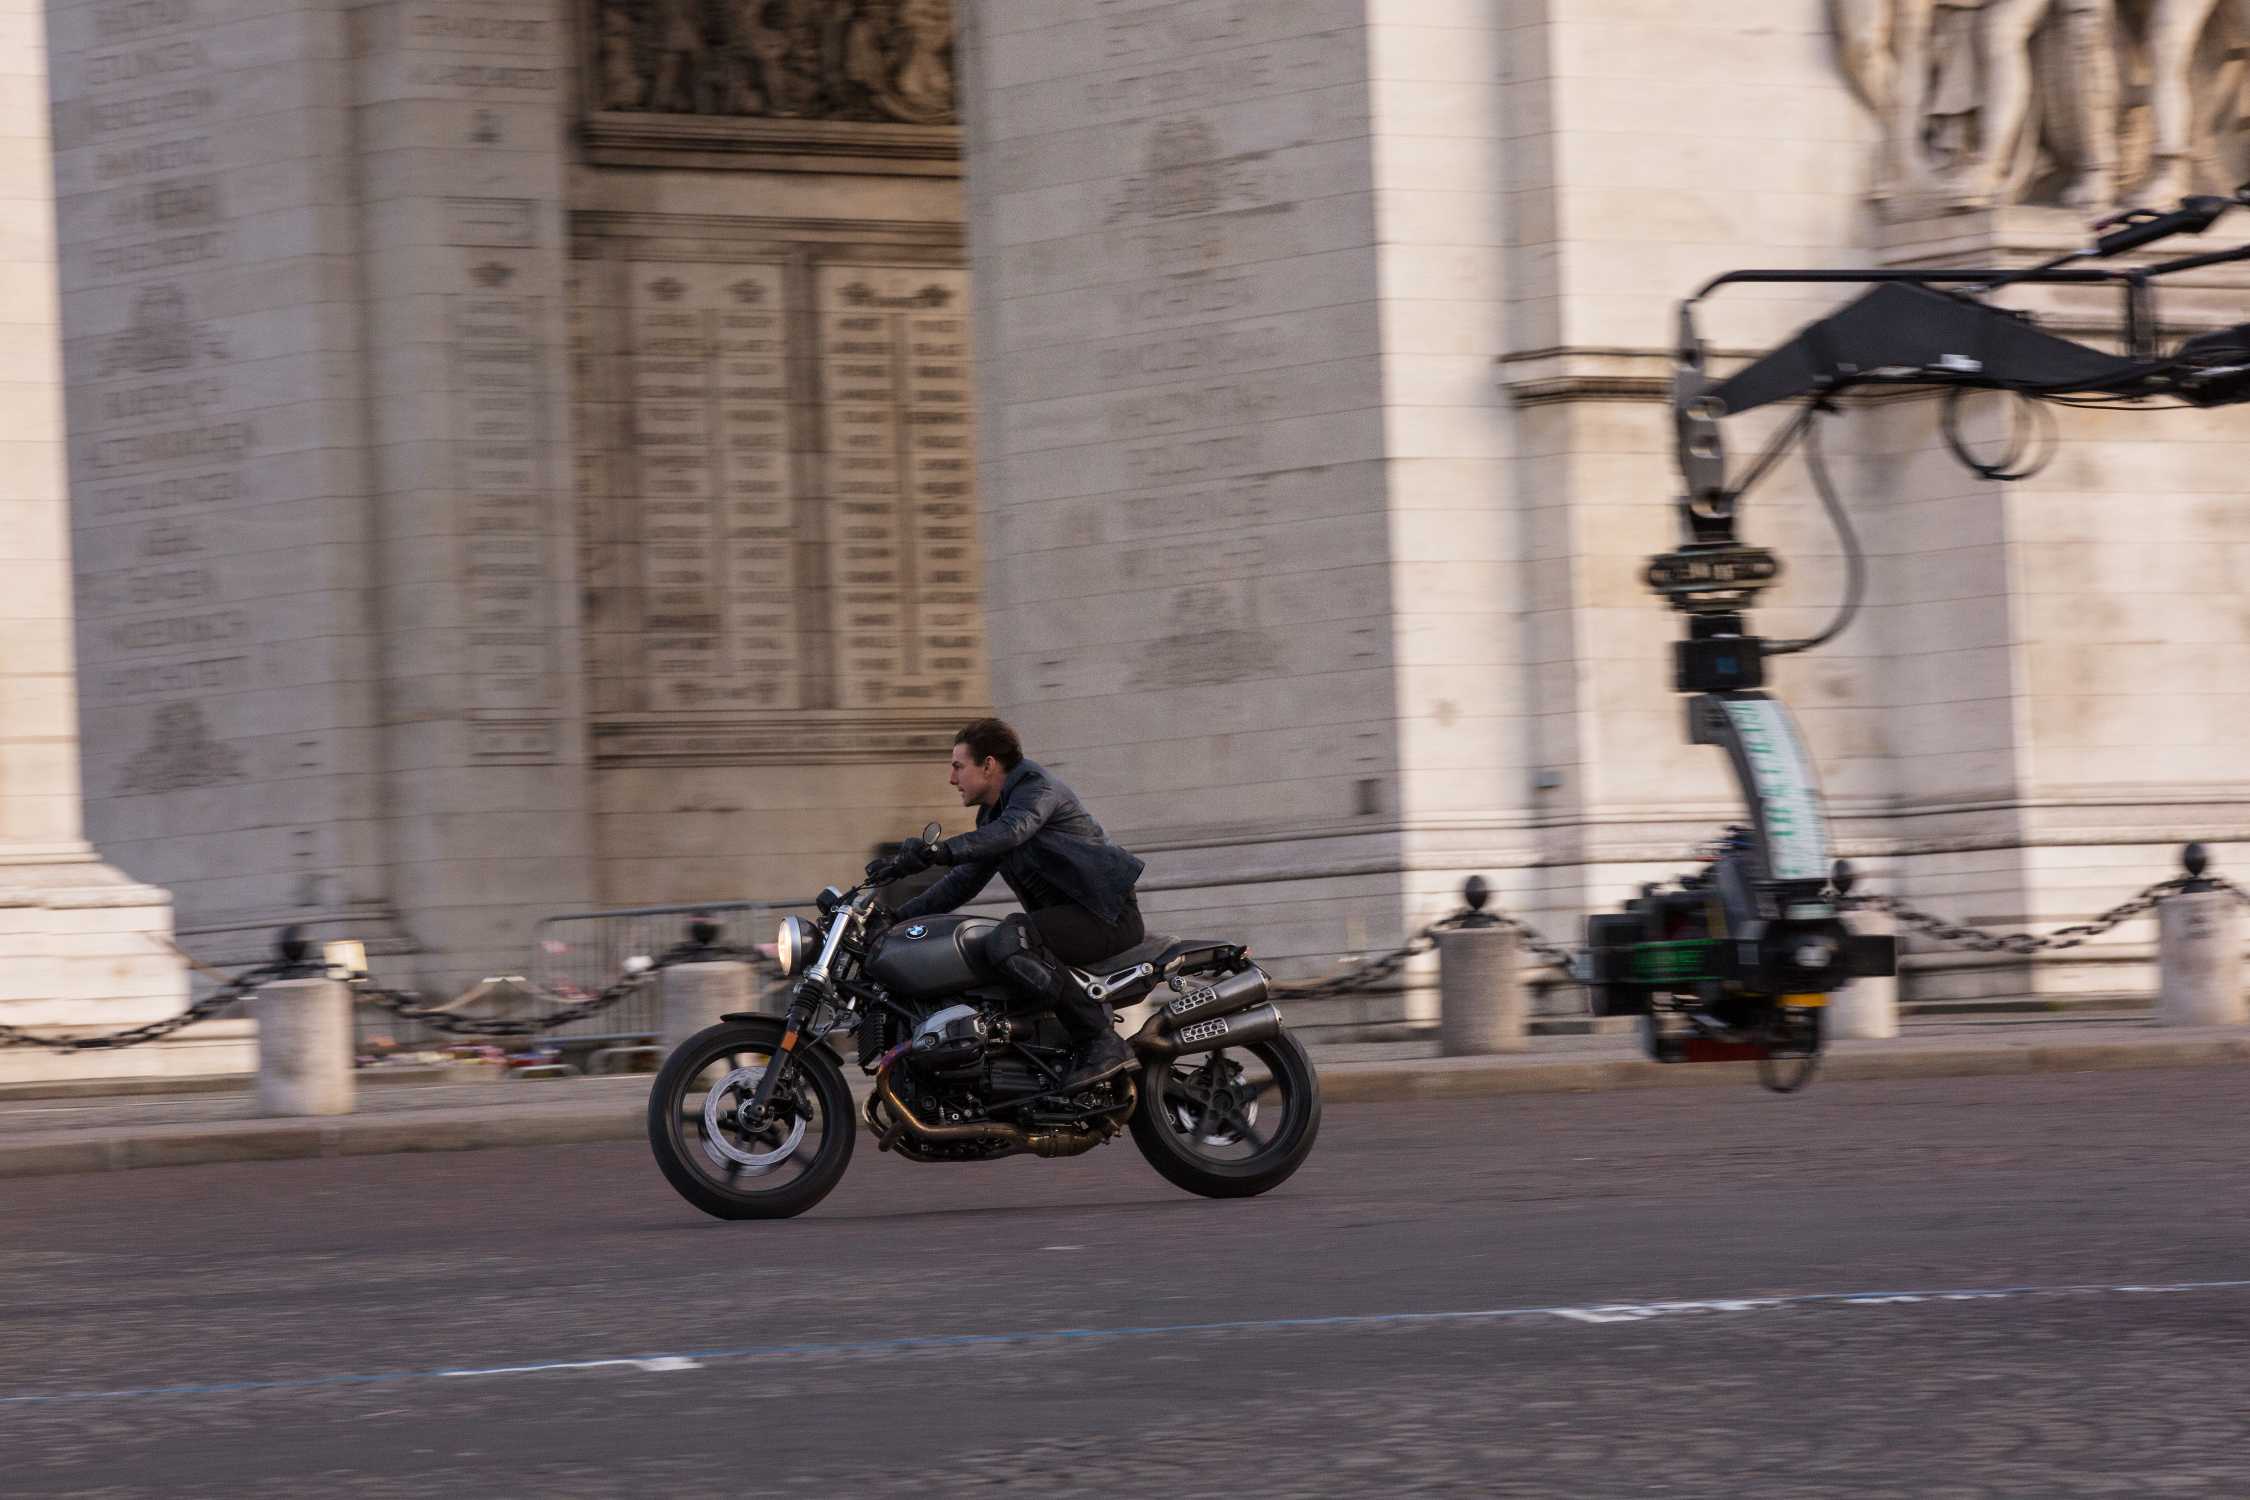 MISSION: IMPOSSIBLE – FALLOUT
Tom Cruise on the set of MISSION: IMPOSSIBLE – FALLOUT from Paramount Pictures.
Photo Credit: Chiabella James
© 2018 Paramount Pictures. All rights reserved.